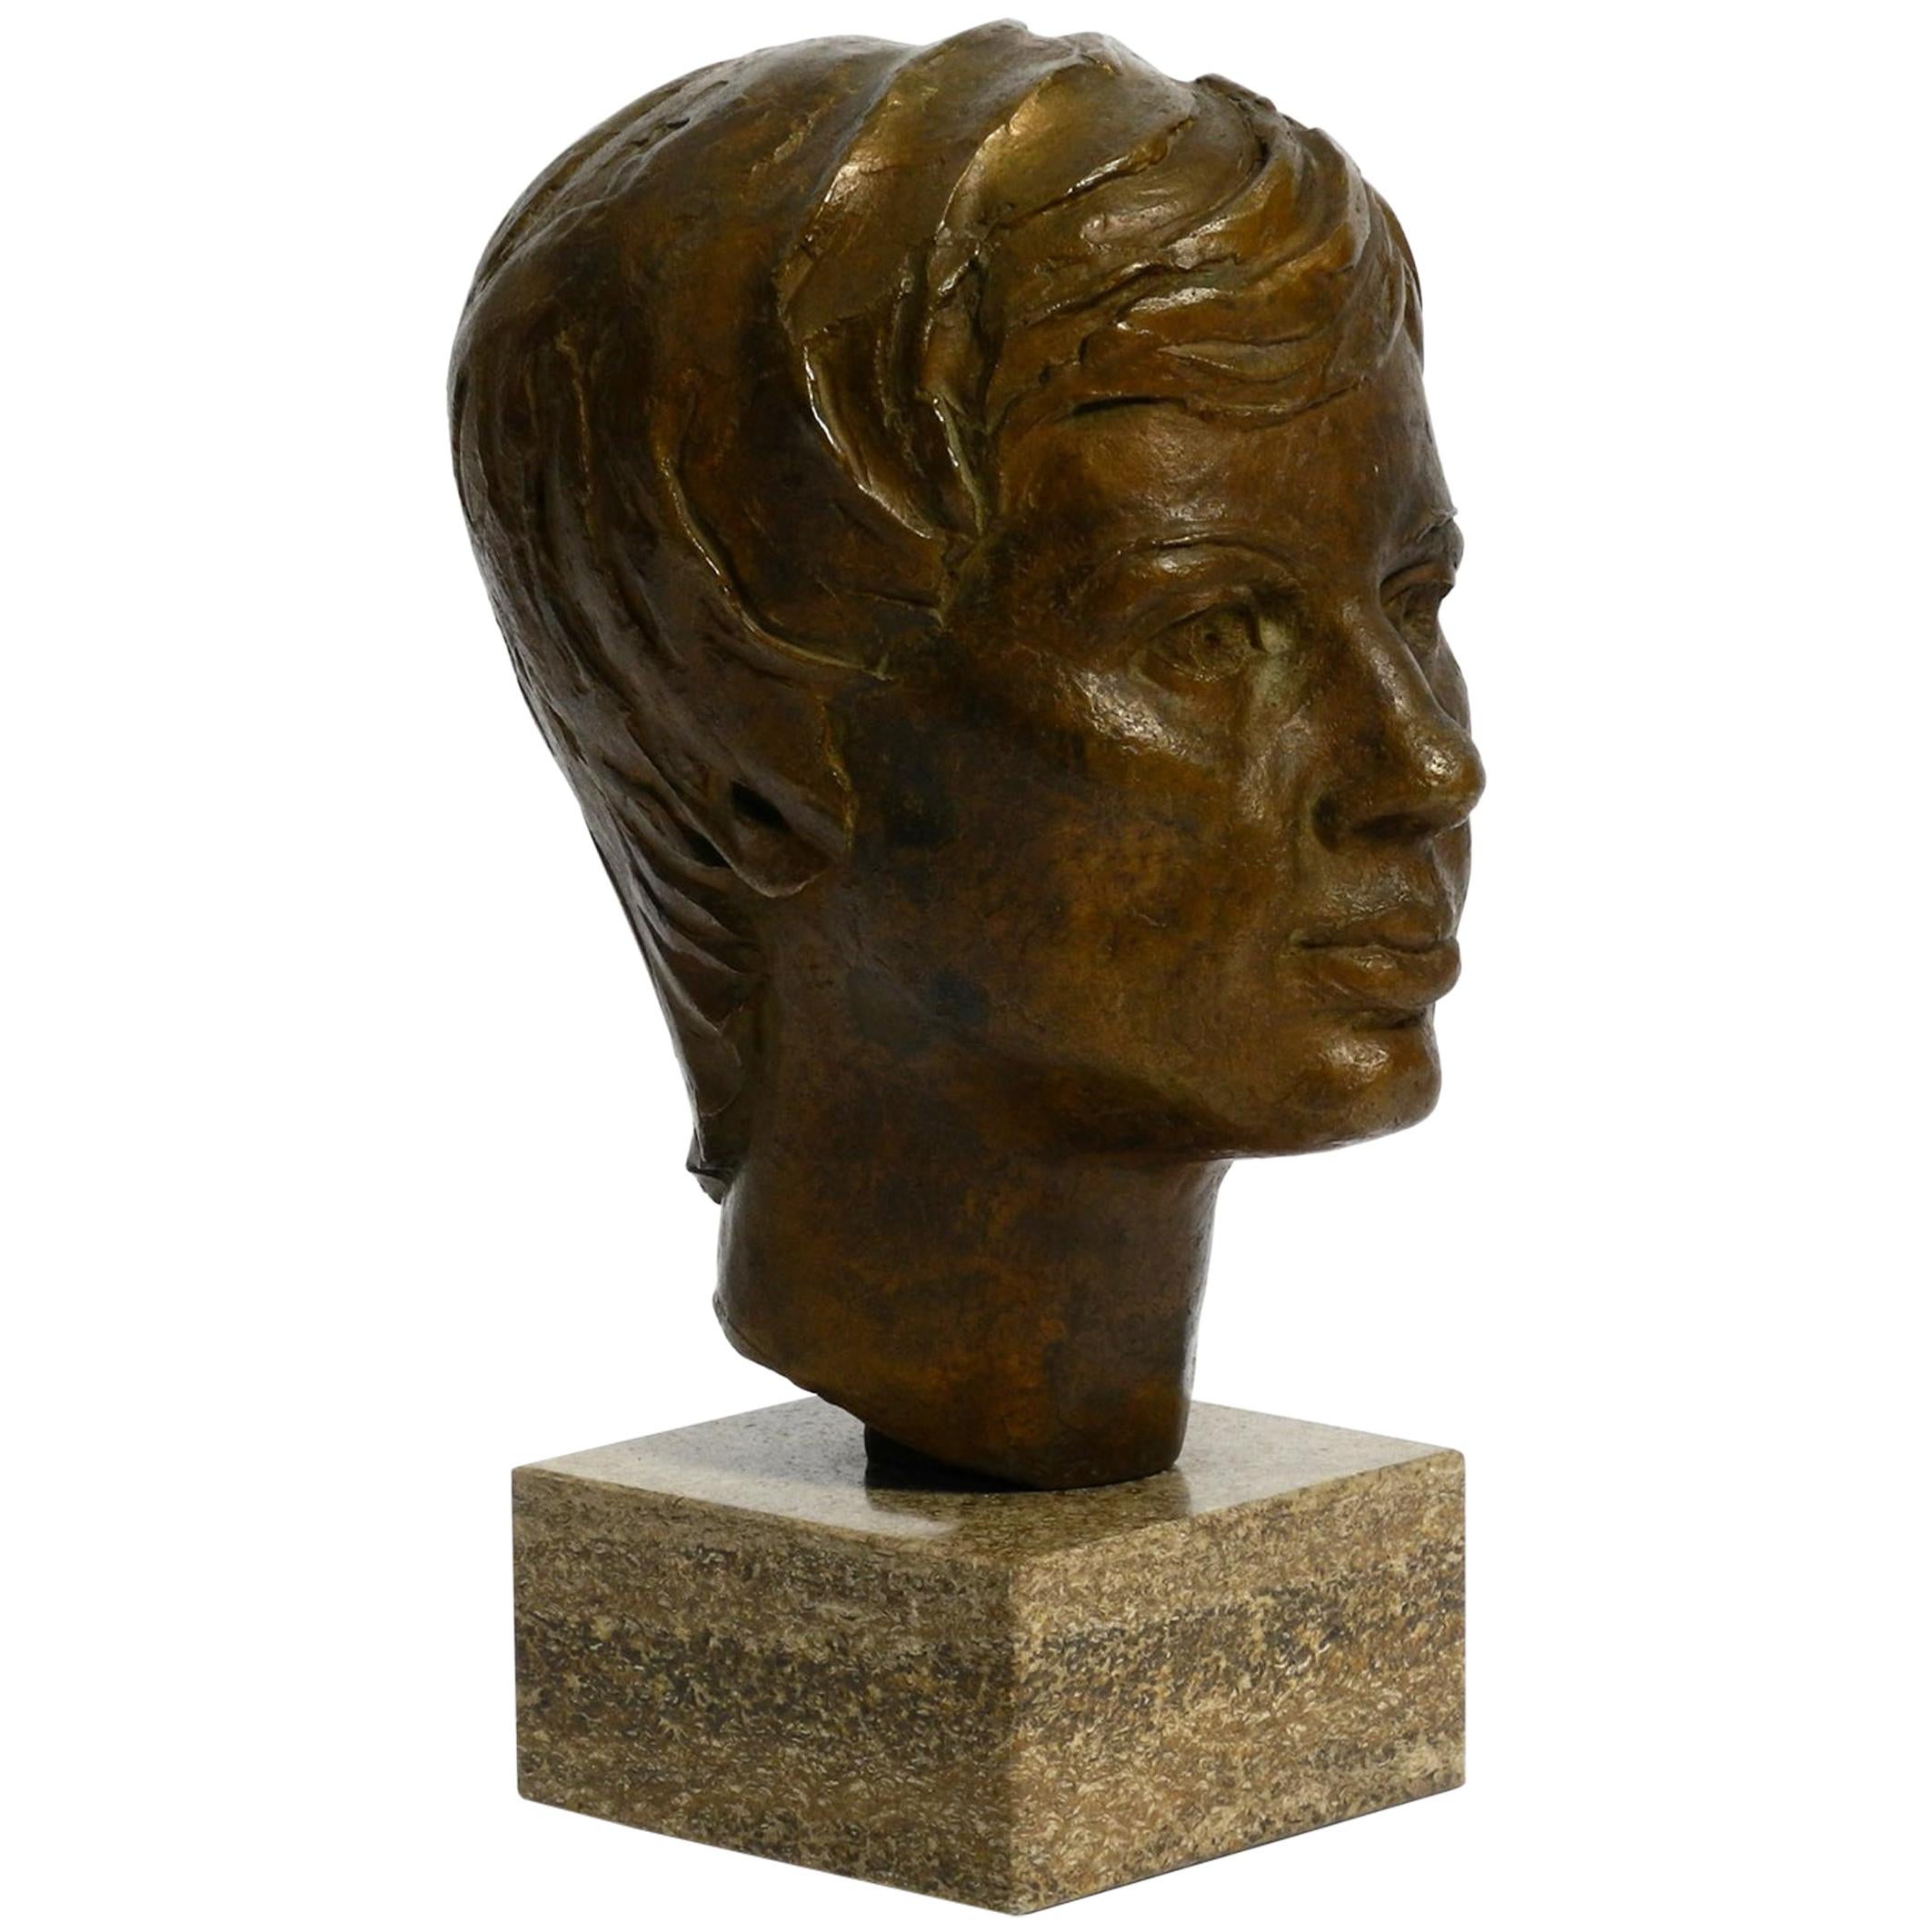 Very Nice Heavy Bronze Bust on a Marble Base Signed with HA from 1976